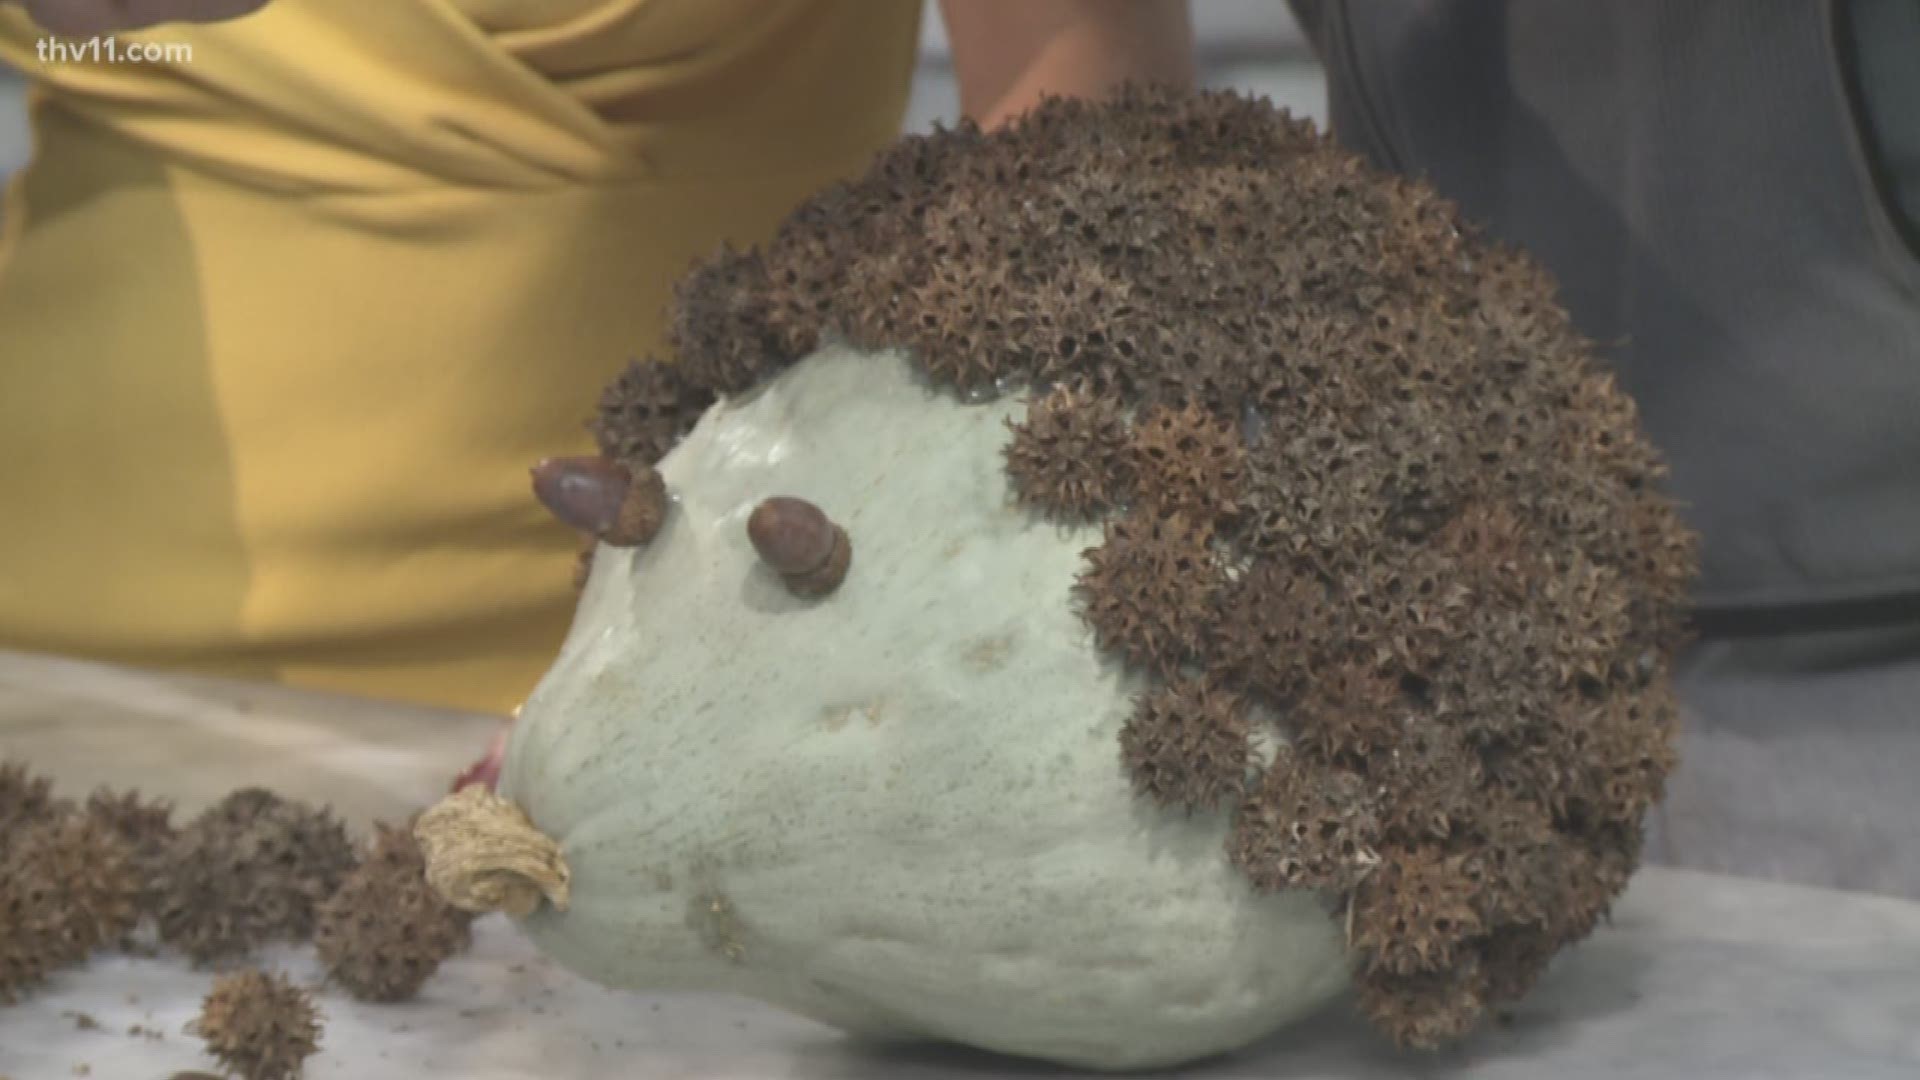 Fall is in full swing and Chris H. Olsen is here to help us add some fun to our autumn decor with cute hedgehog pumpkins.